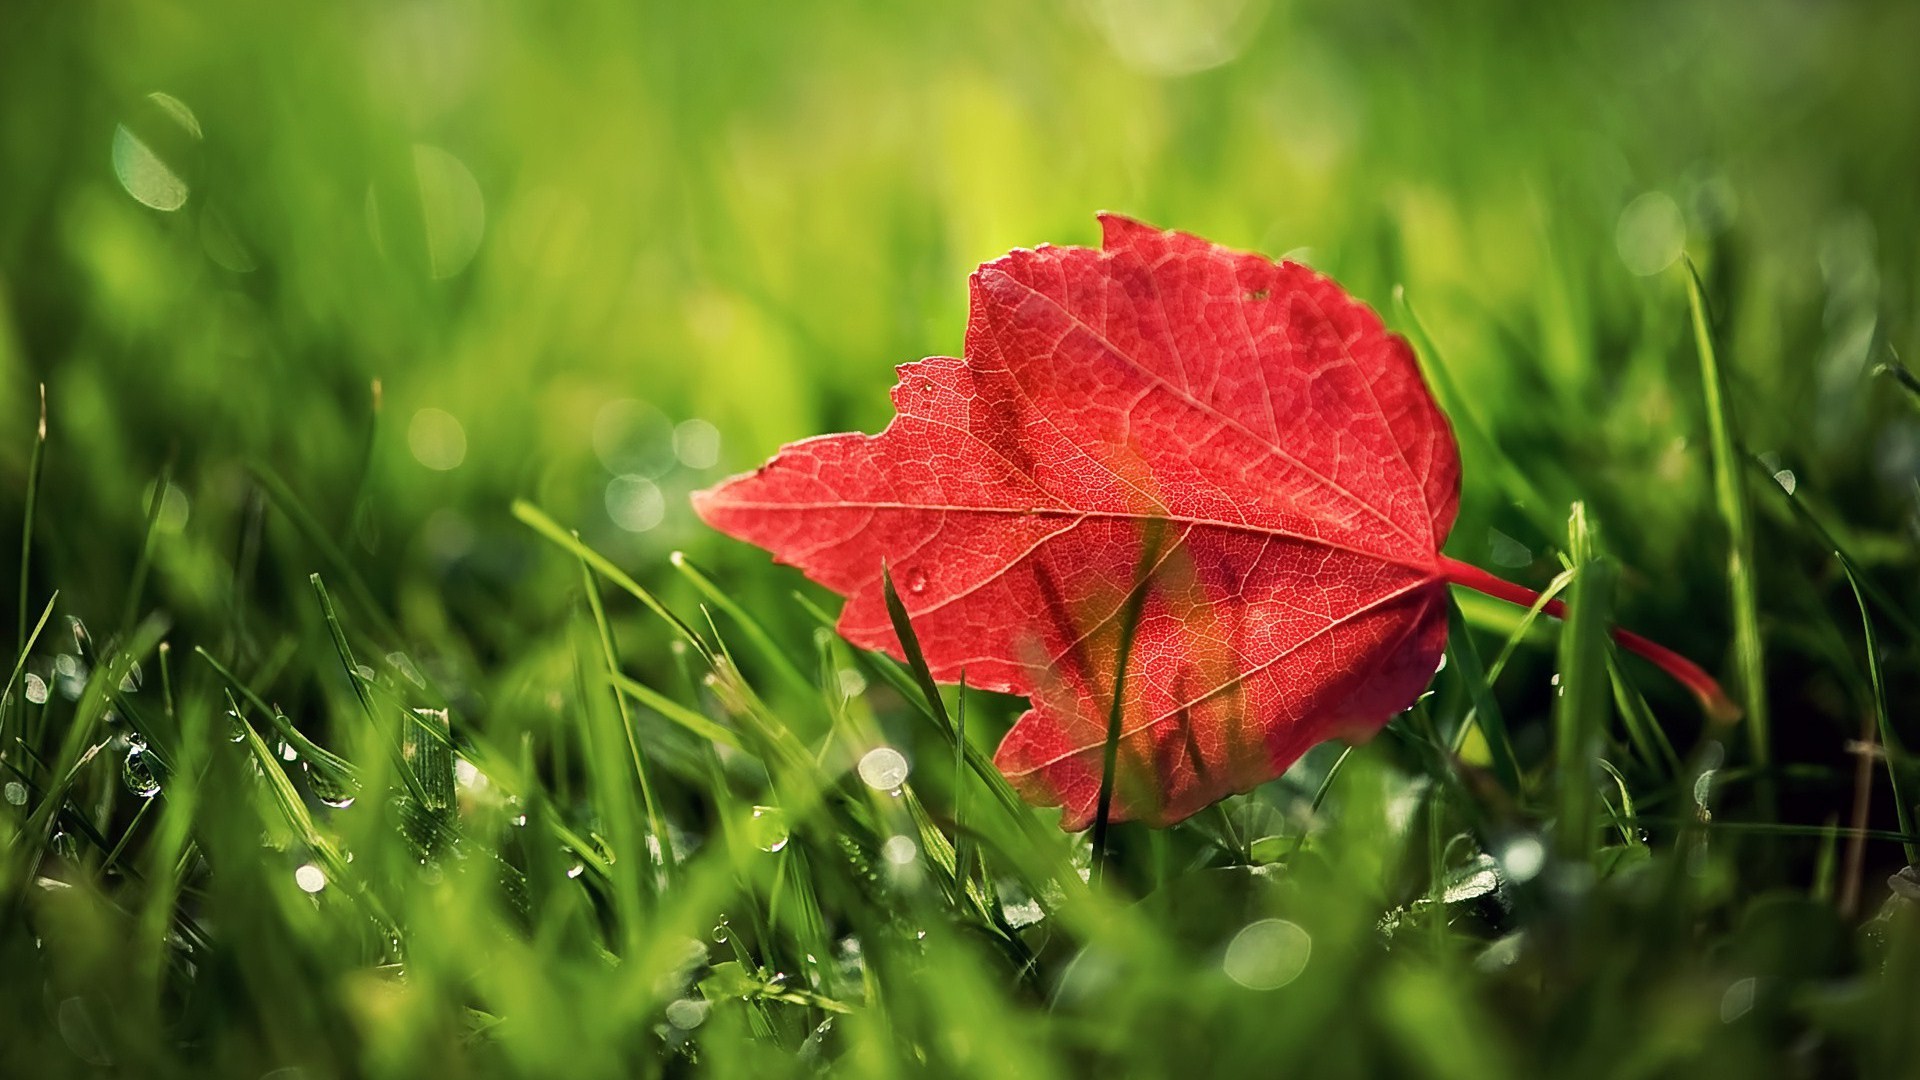 General 1920x1080 leaves grass nature plants fallen leaves dew